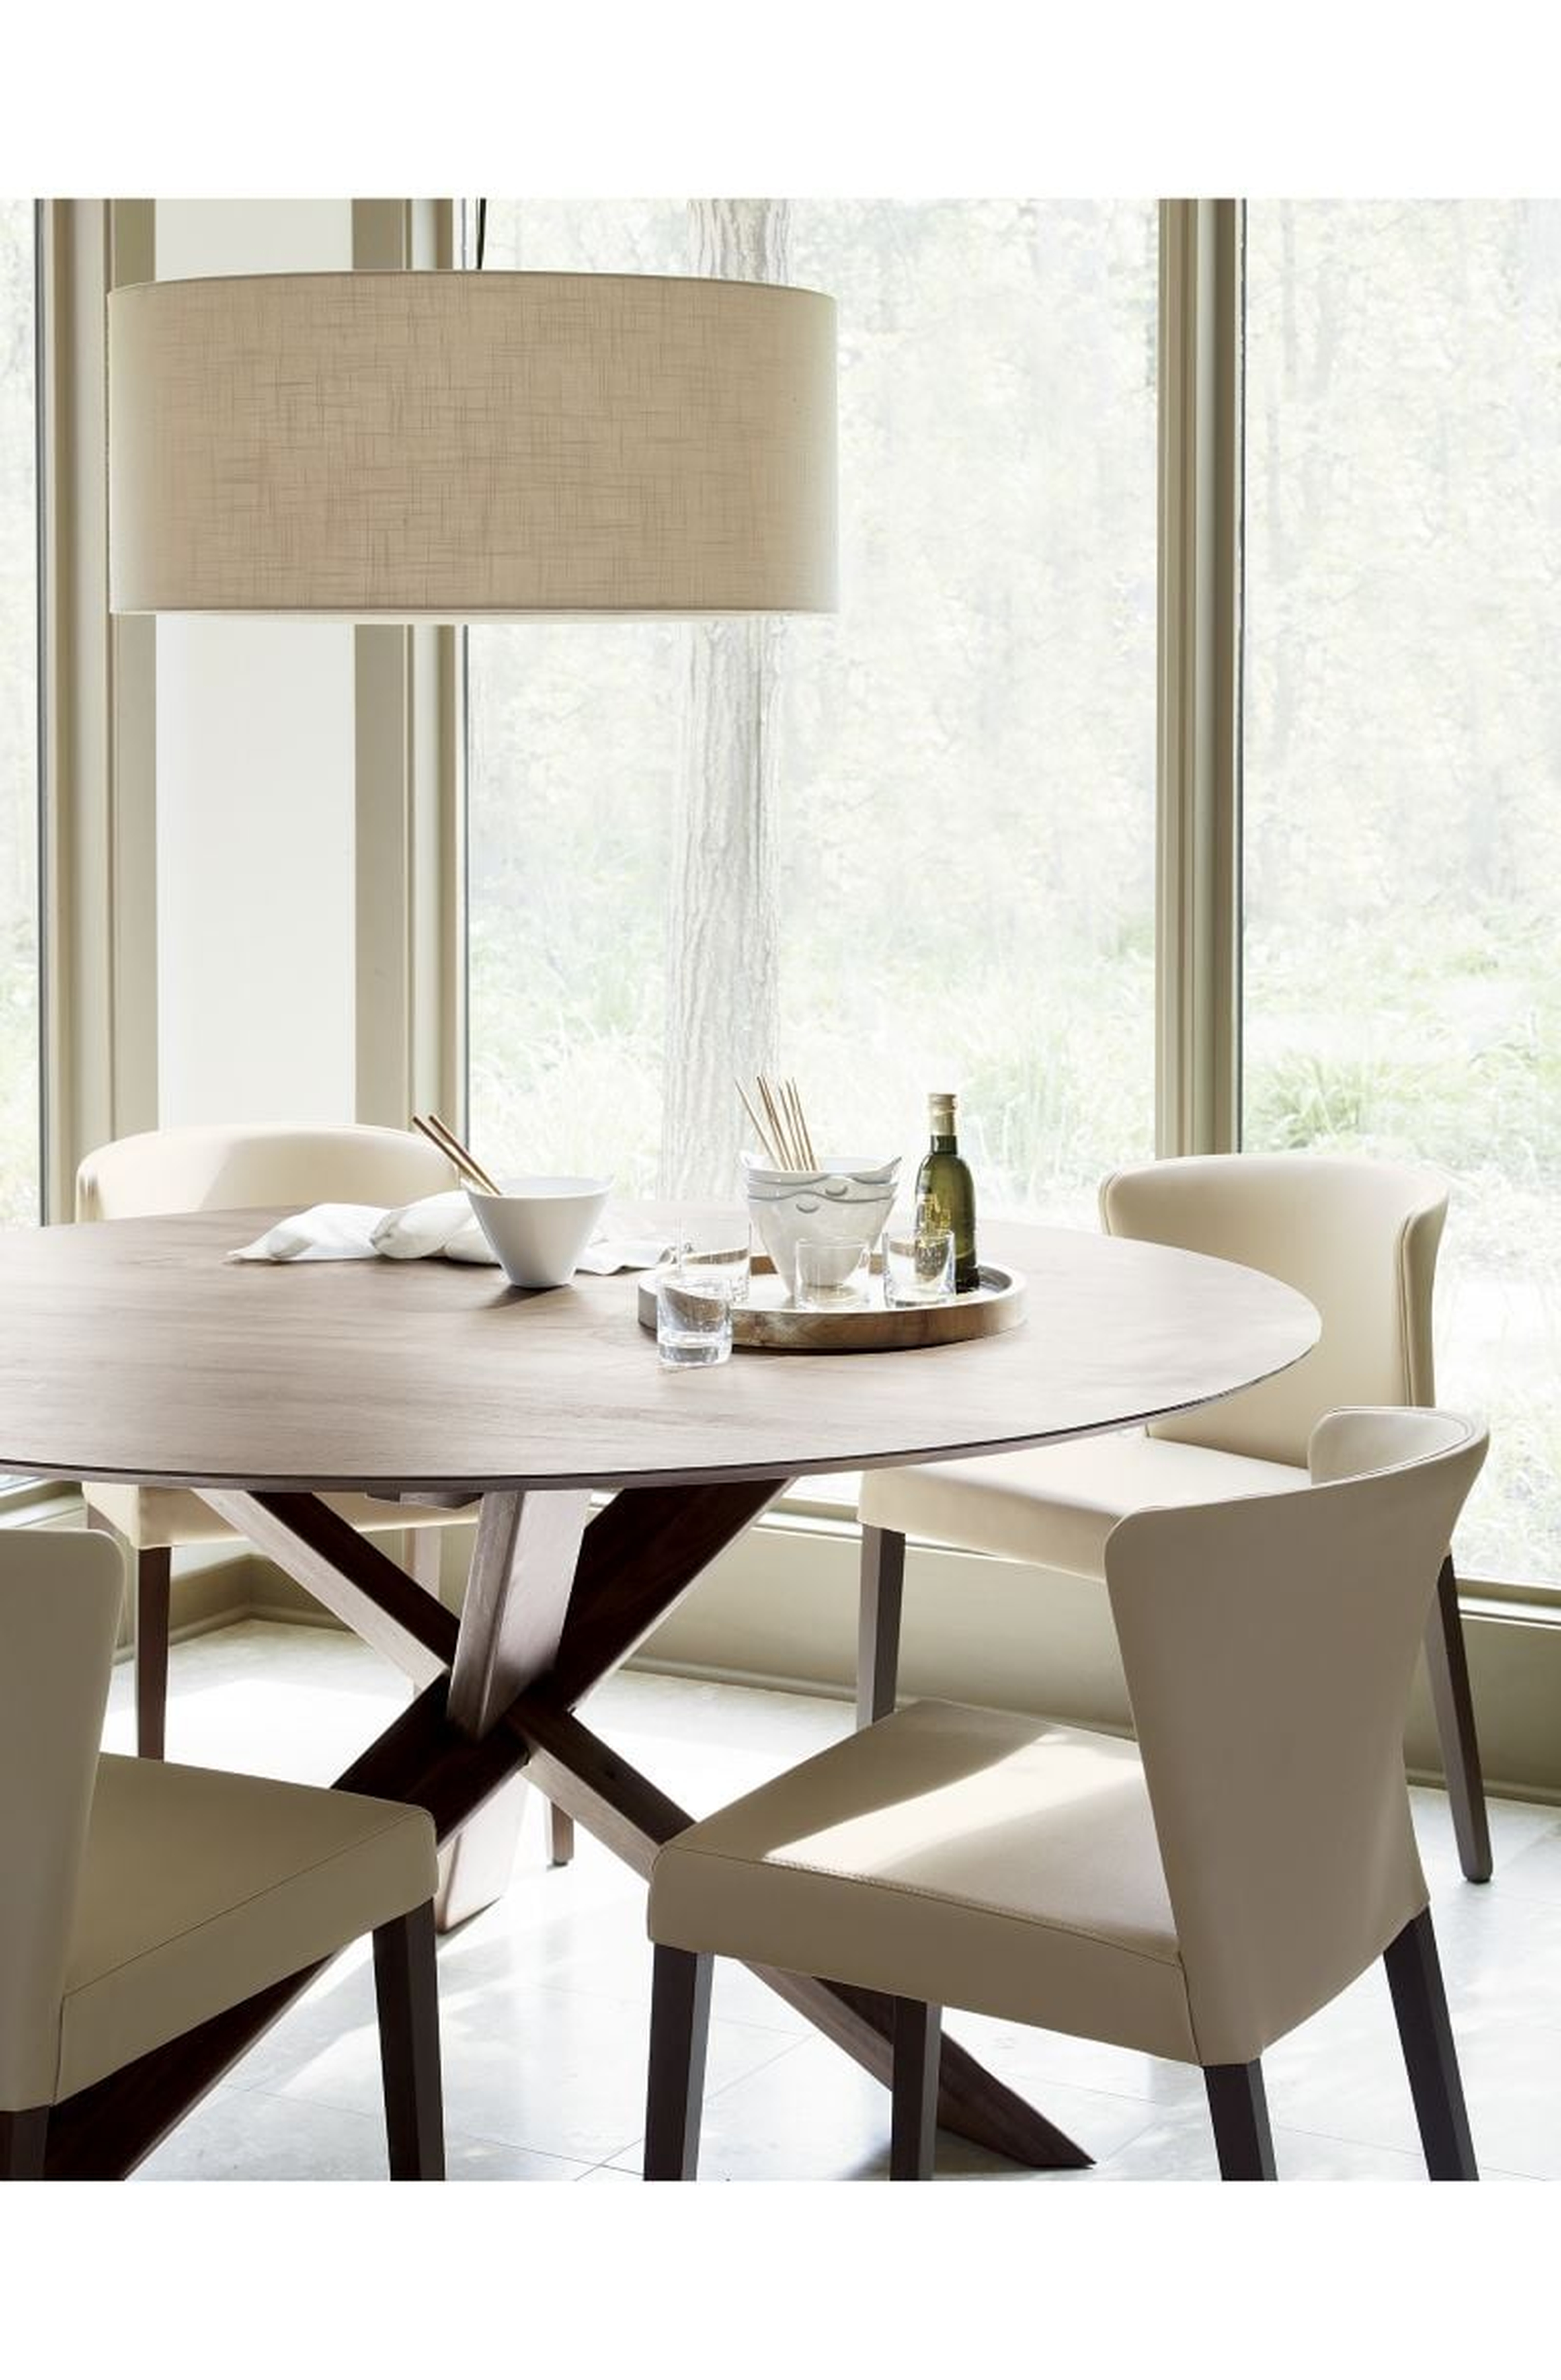 Apex 64" Round Dining Table - Crate and Barrel